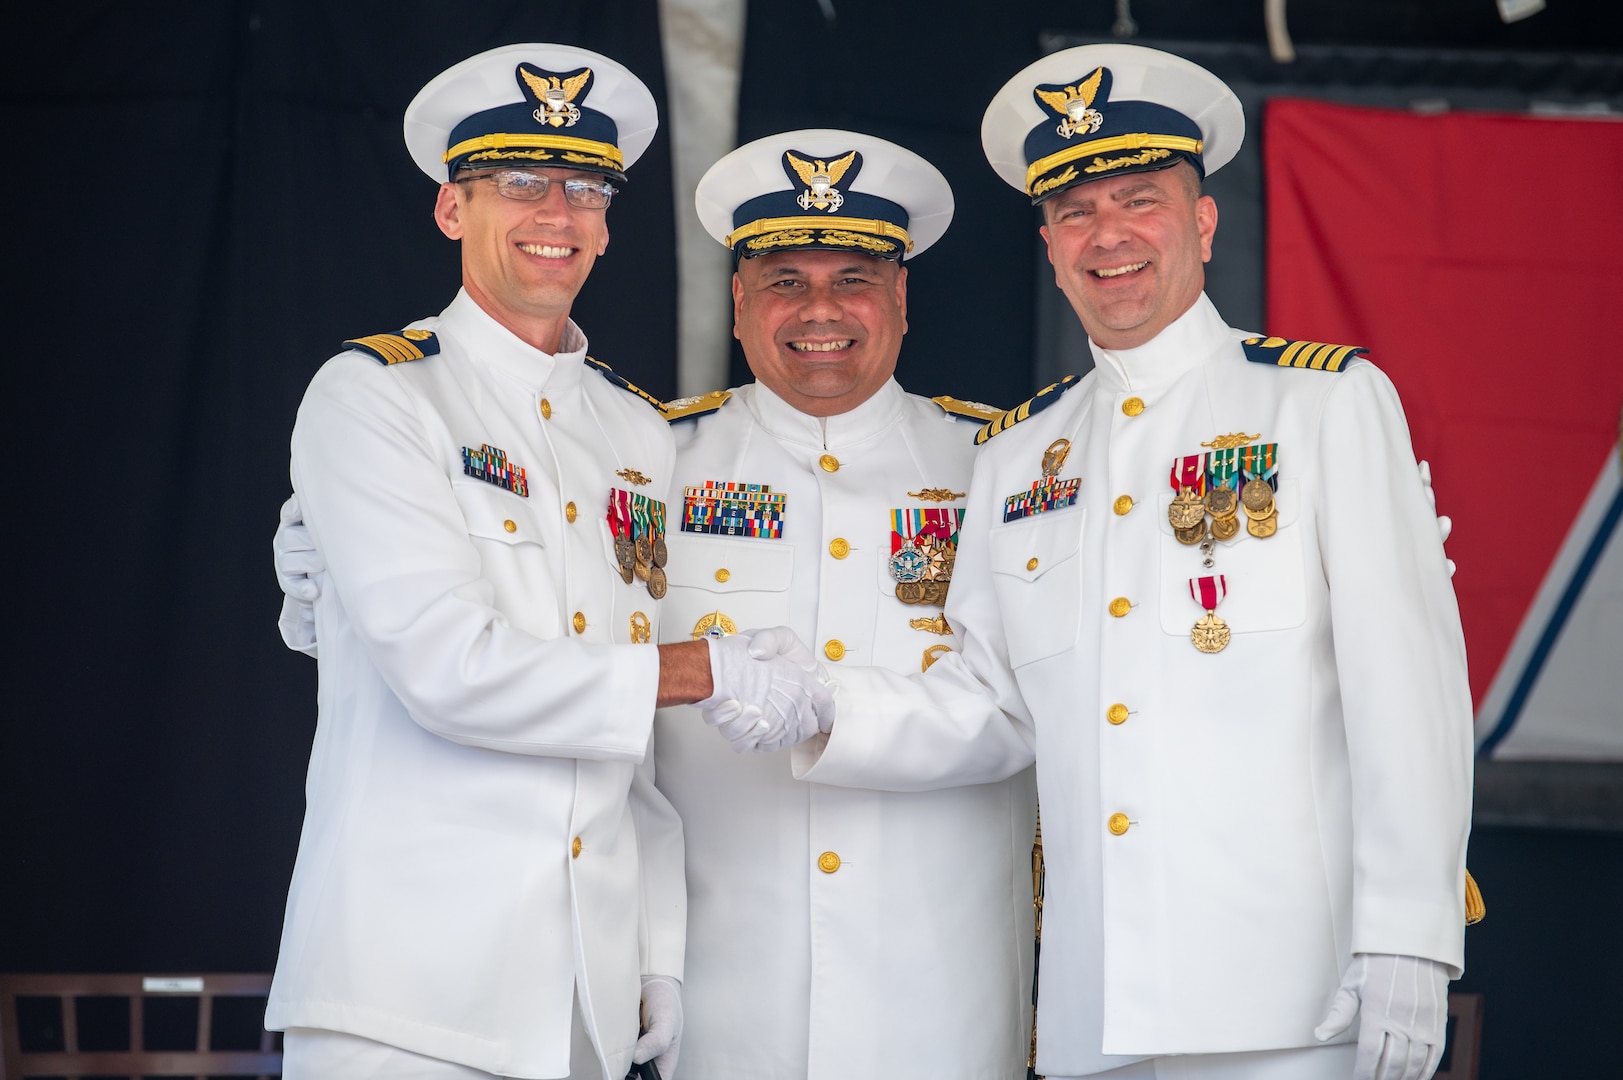 U.S. Coast Guard Capt. Jeffrey Rasnake shakes hands with Capt. Keith Ropella with Vice Adm. Andrew Tiongson standing between them.